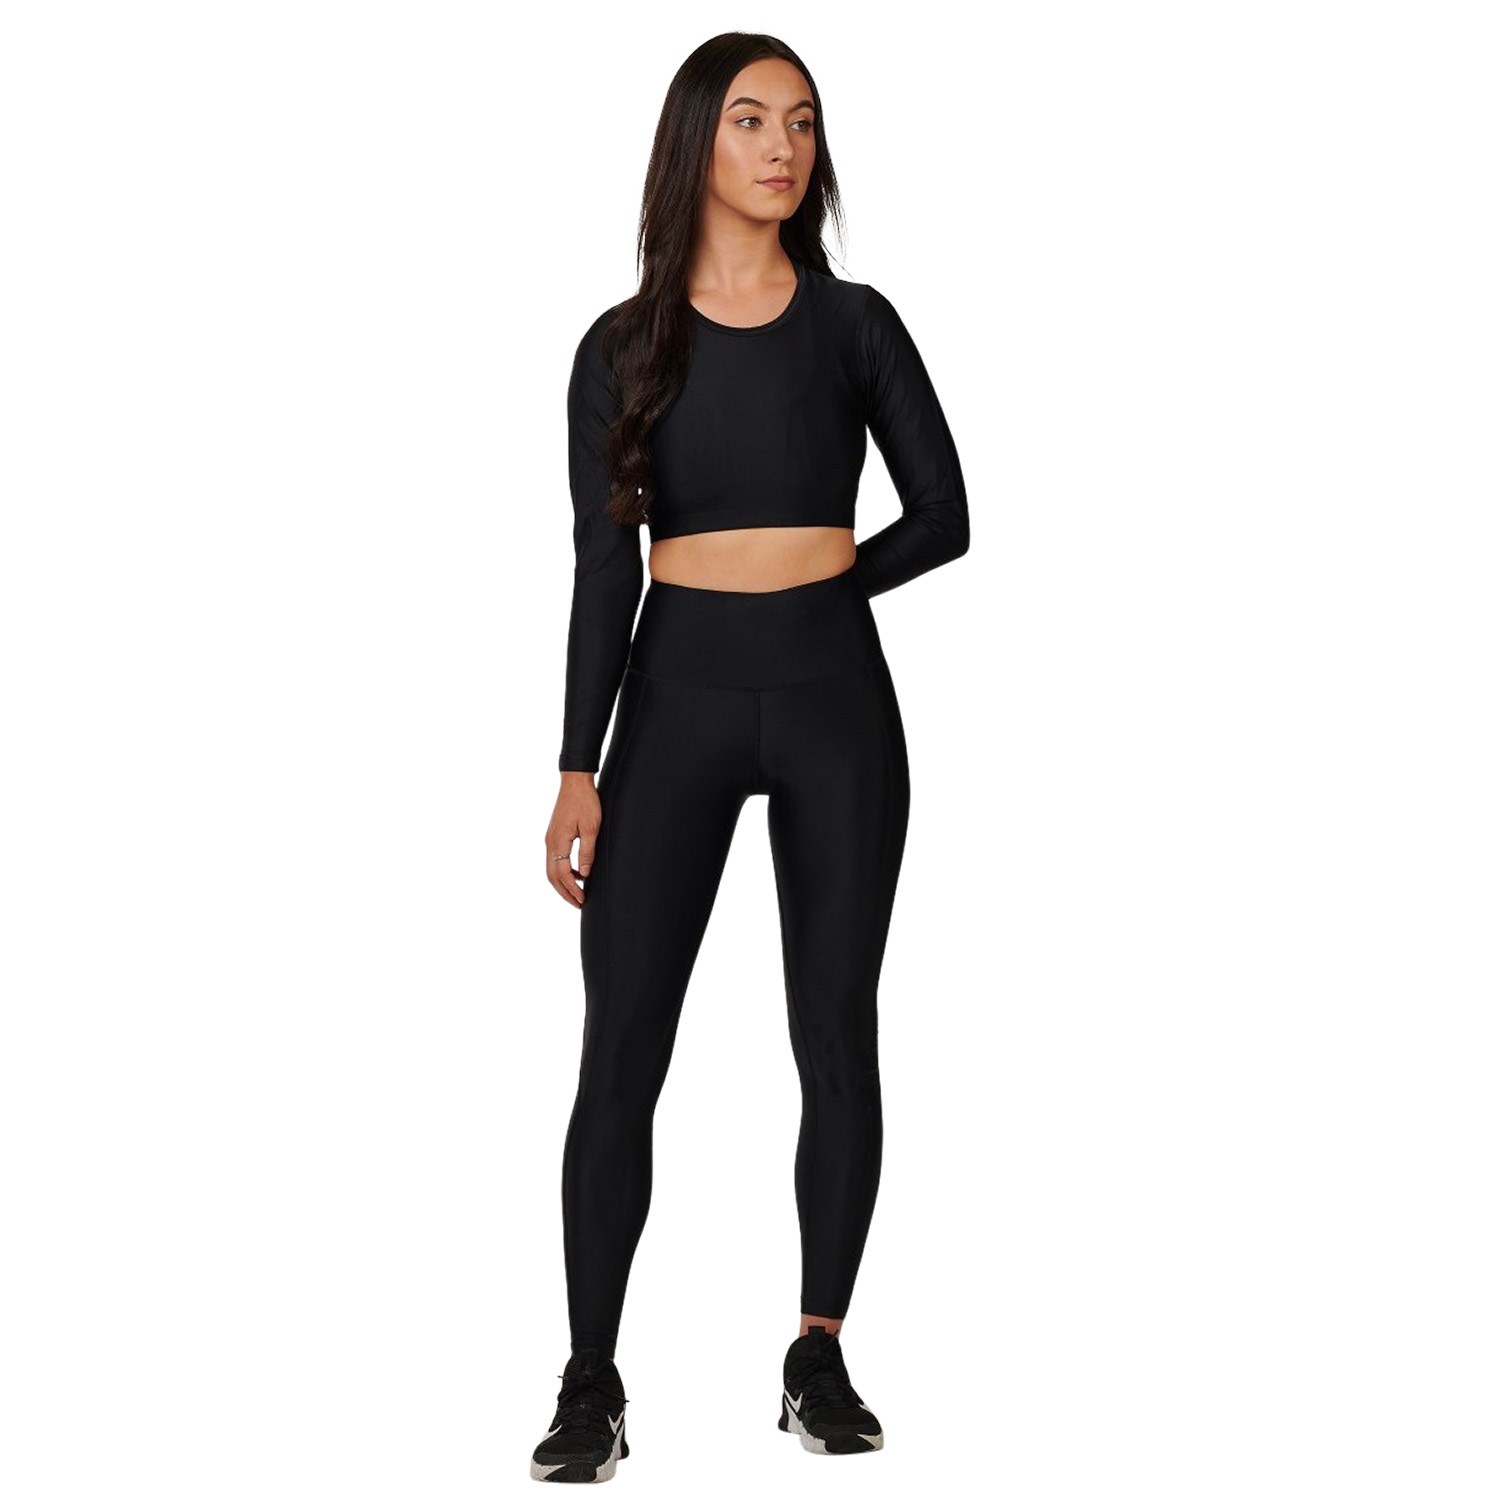 o2fit Womens High Waist Compression Tights - Black | Sportitude